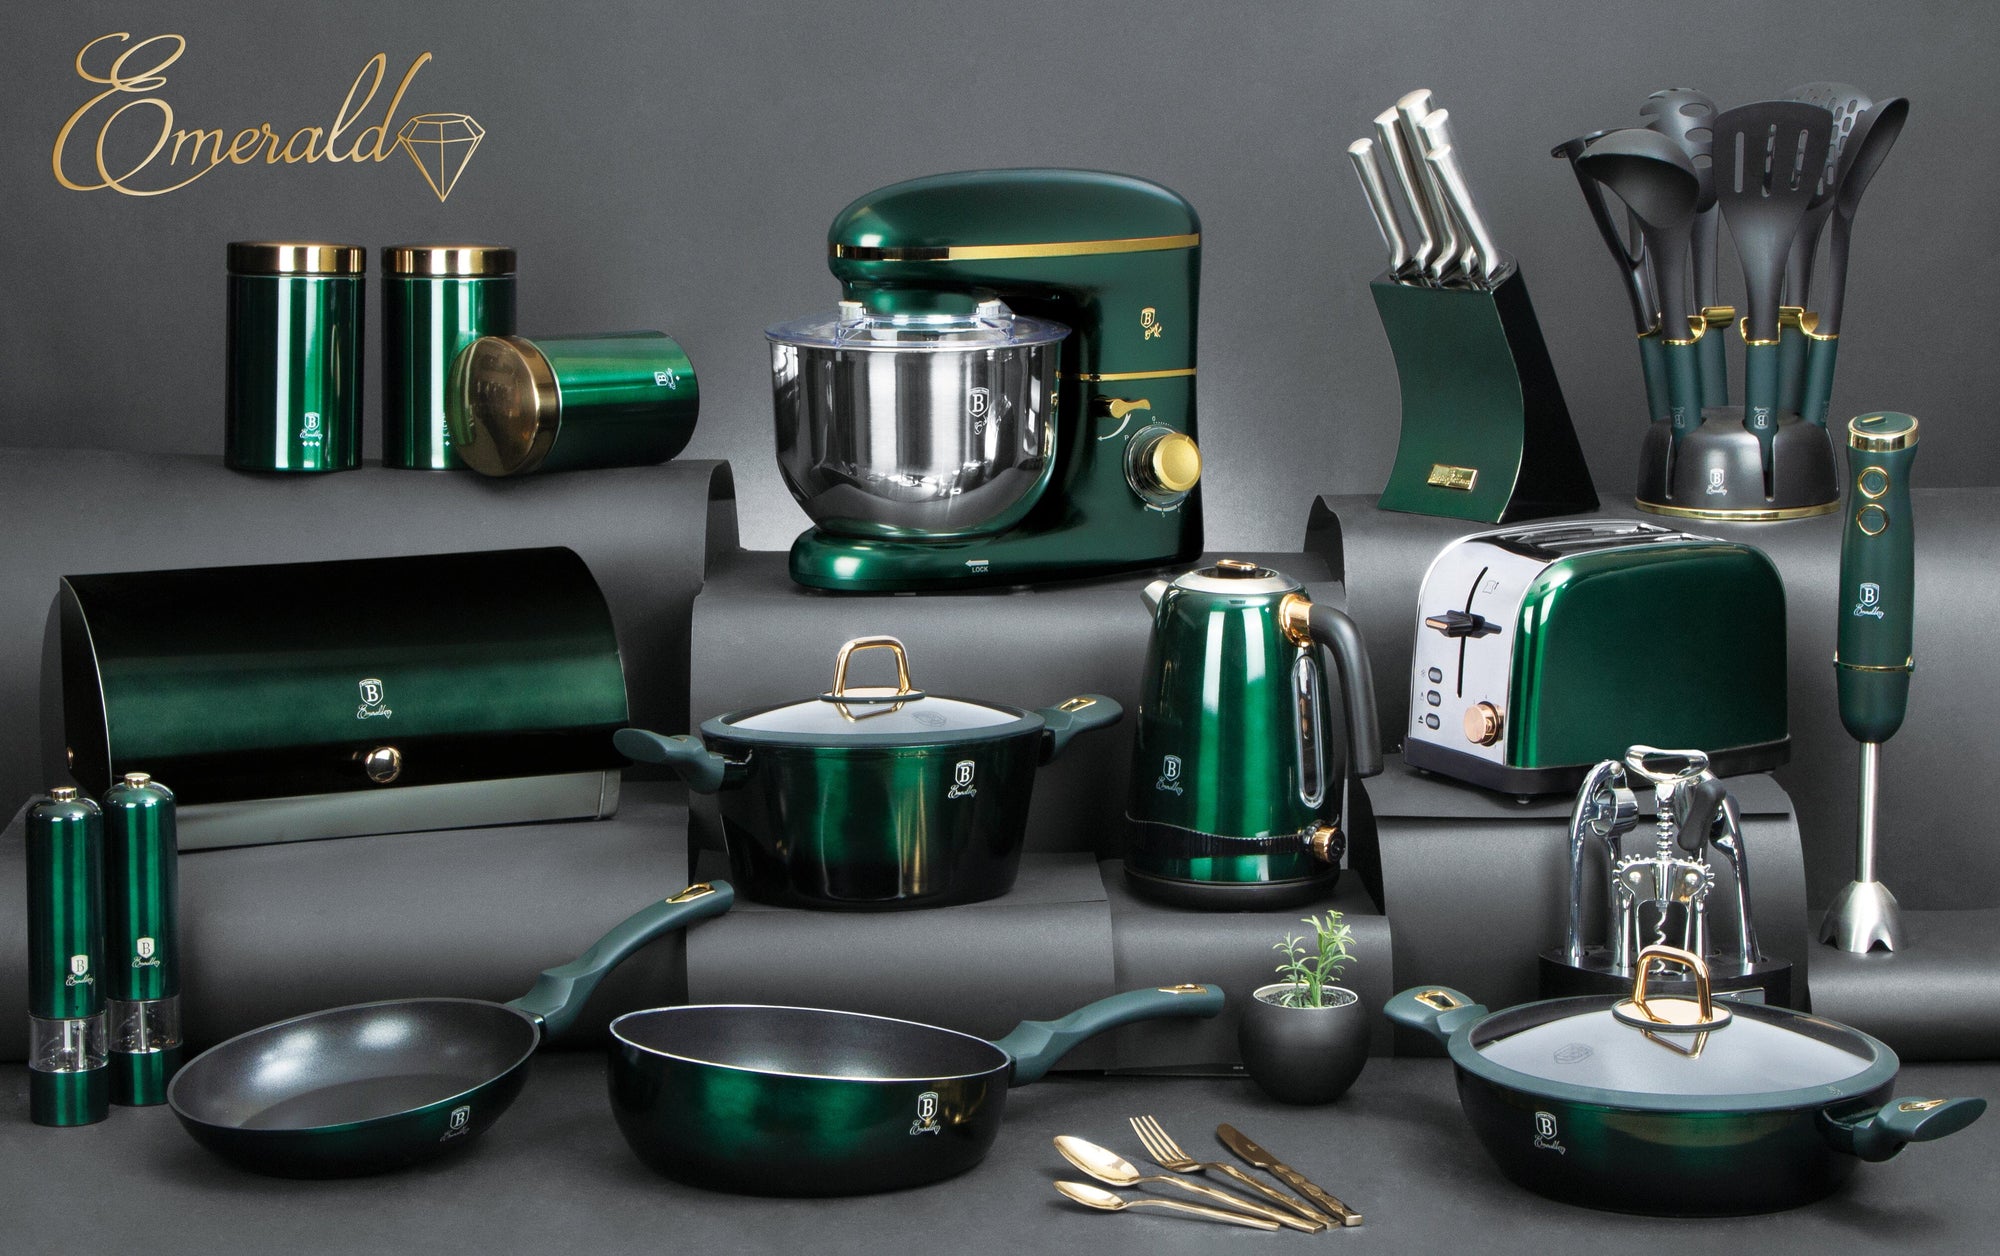 Berlinger Haus Cookware: The Perfect Gift for Food Enthusiasts